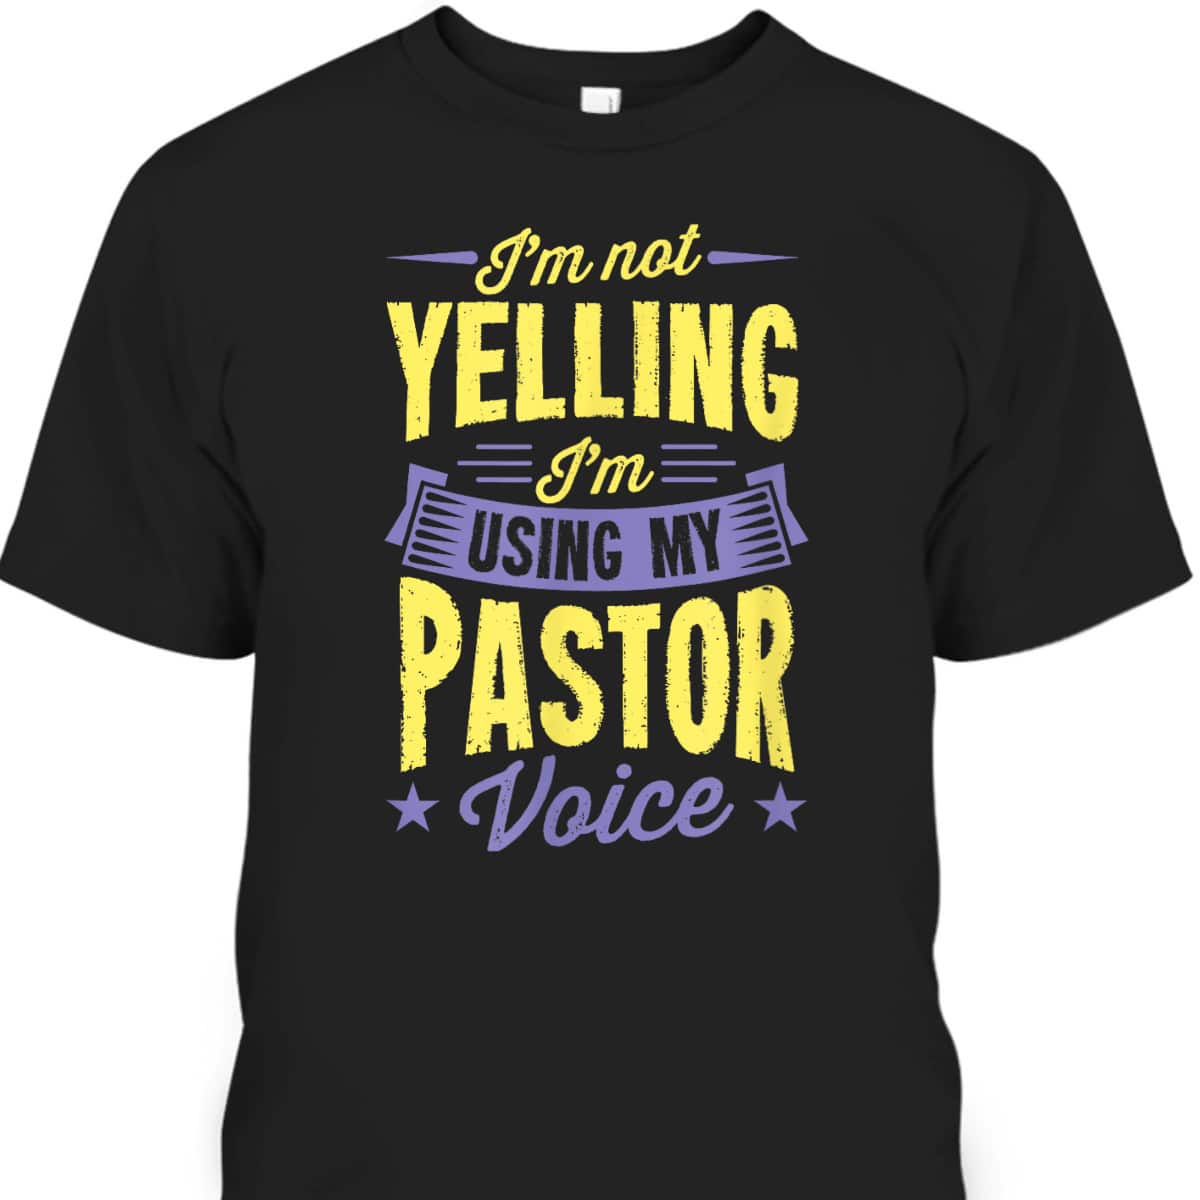 I'm Not Yelling I'm Using My Pastor Voice Funny Christian T-Shirt